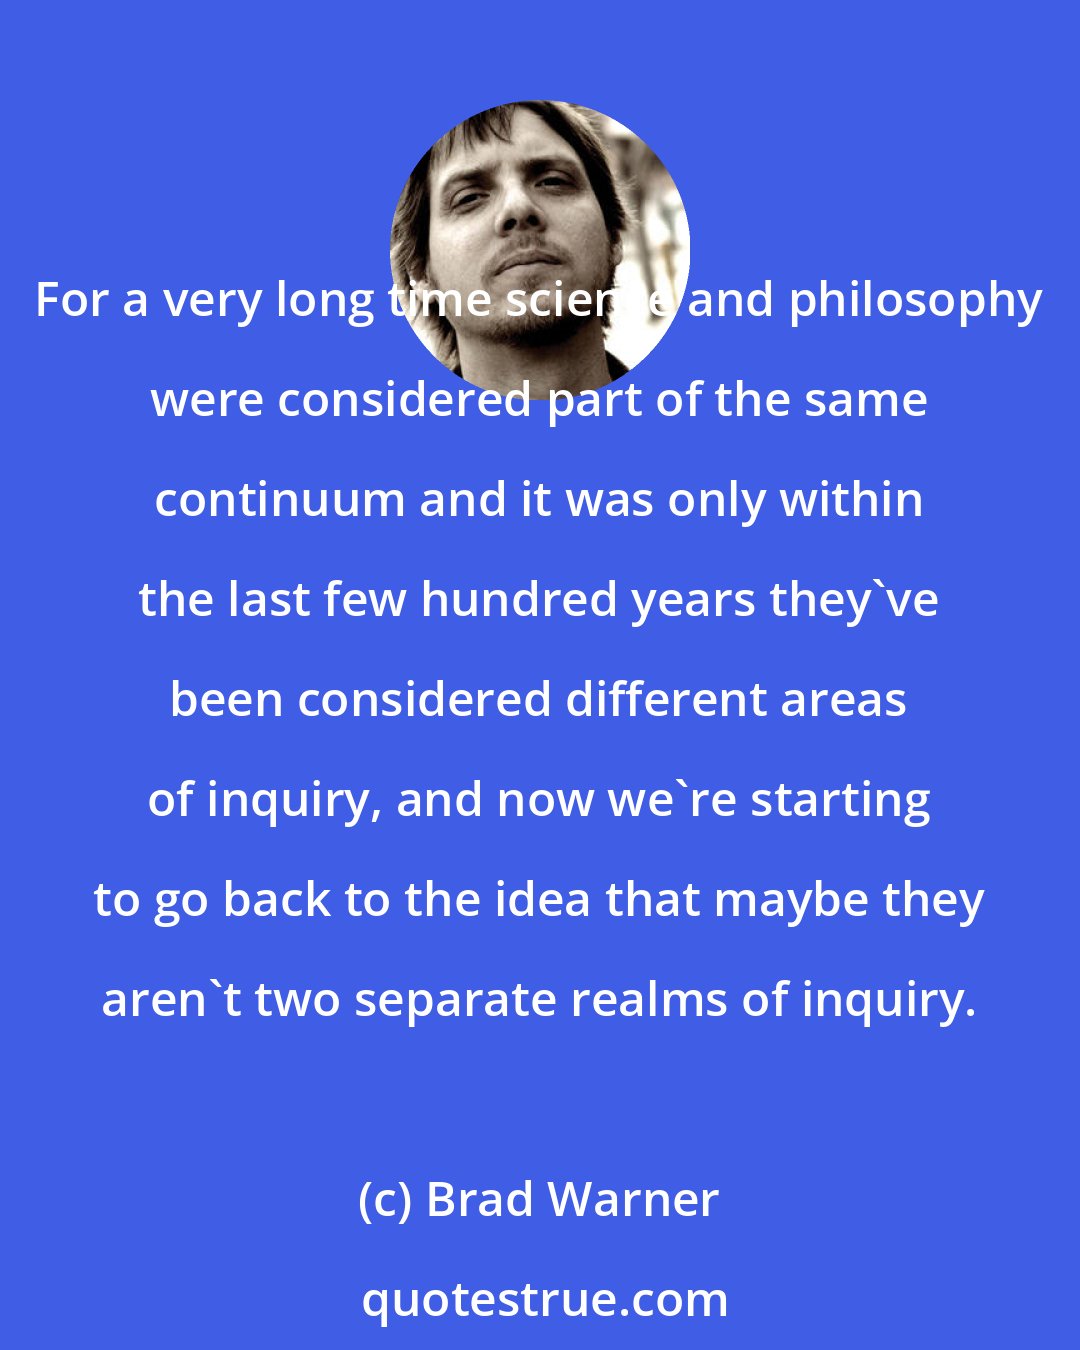 Brad Warner: For a very long time science and philosophy were considered part of the same continuum and it was only within the last few hundred years they've been considered different areas of inquiry, and now we're starting to go back to the idea that maybe they aren't two separate realms of inquiry.